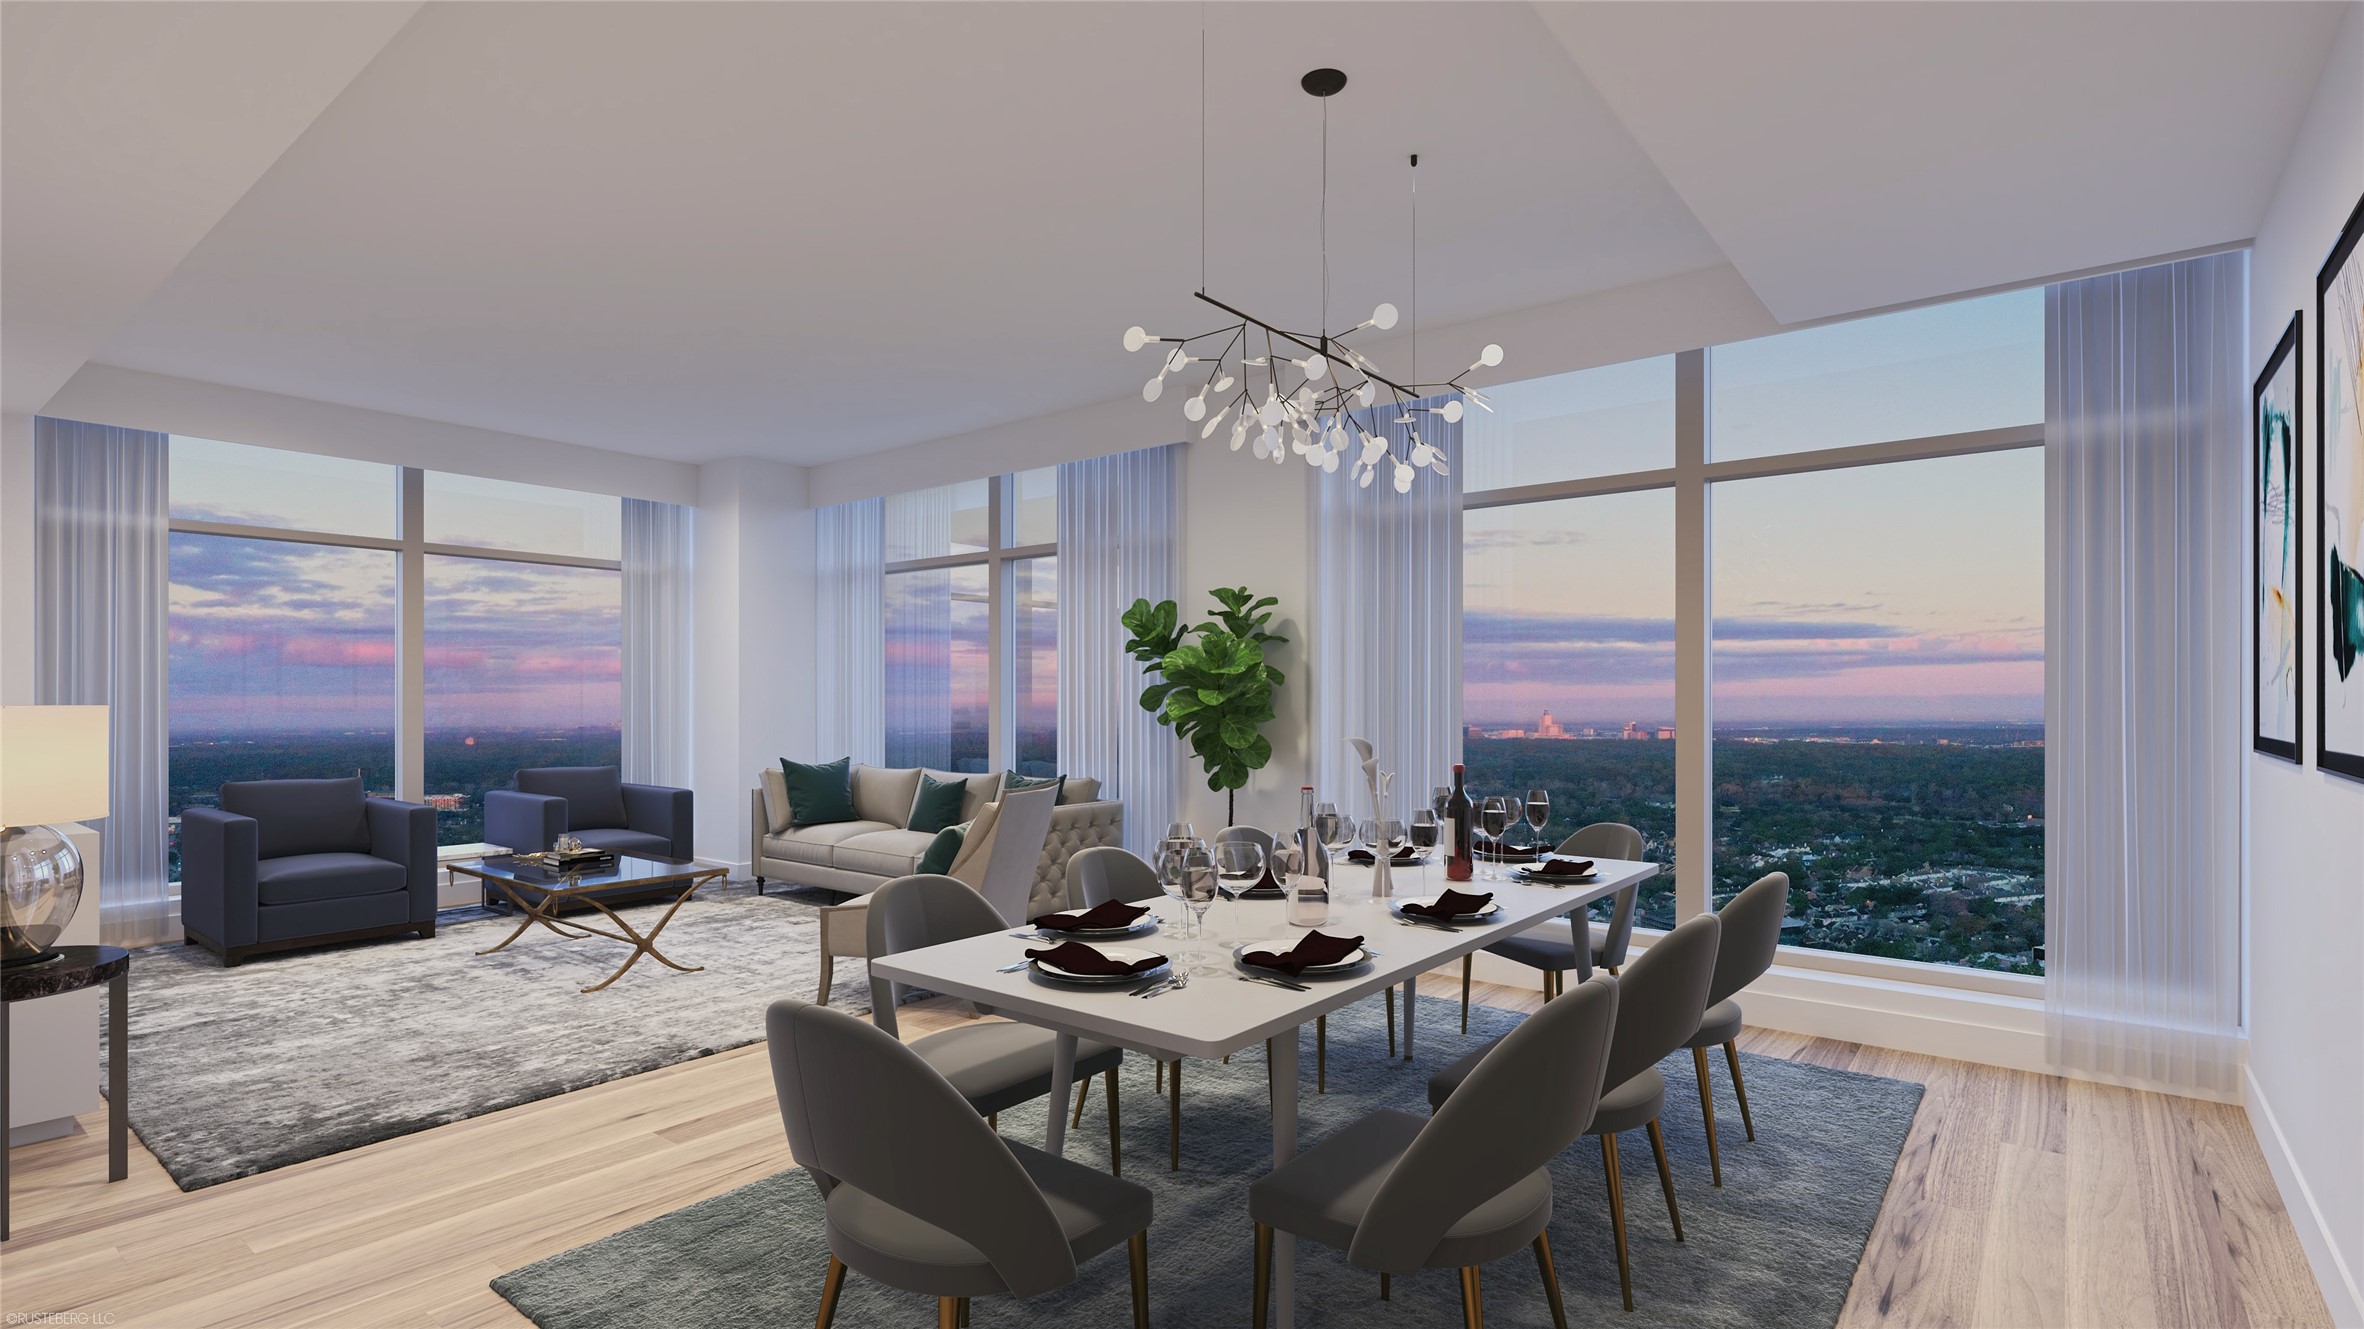 Flawless porcelain slab countertops perfectly coordinate with wide-plank flooring and brass finishes. Soaring window-walls bask in the impressive views that surround The Hawthorne, and transition into balcony access for easy outdoor entertainment.